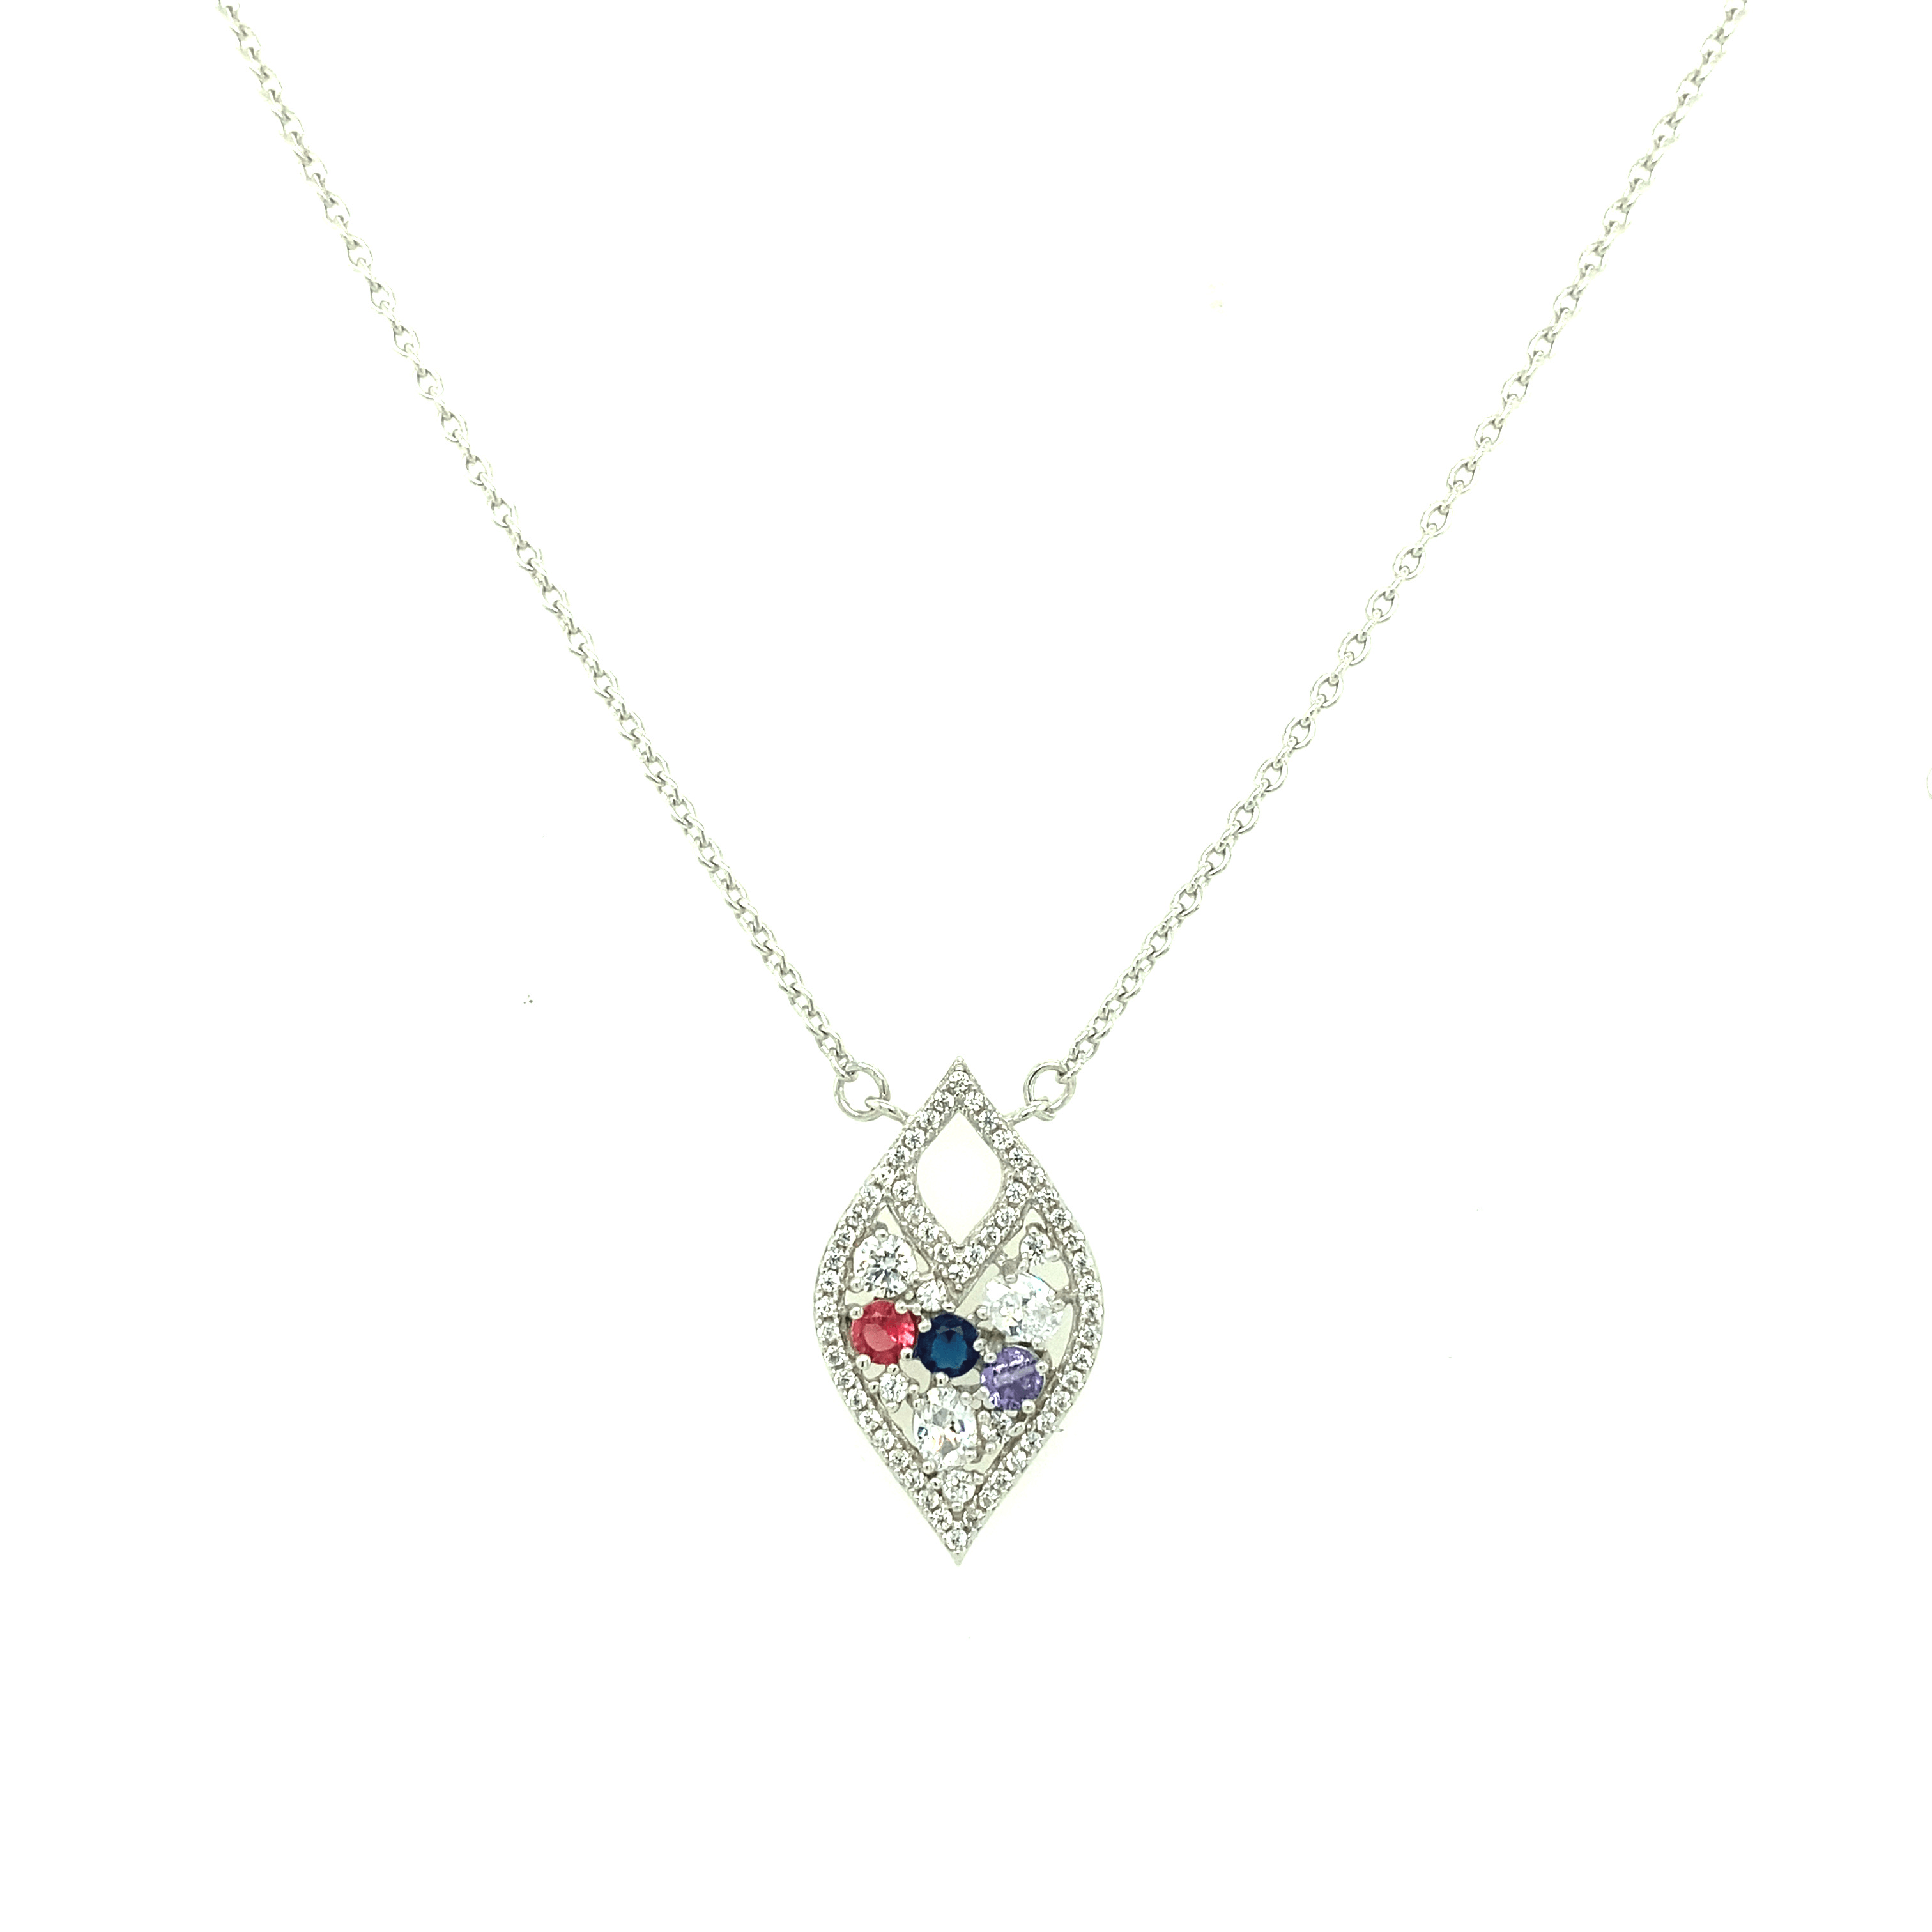 Asfour-Crystal-Silver-accessoriesNecklace-N1732-C-925-Sterling-Silver